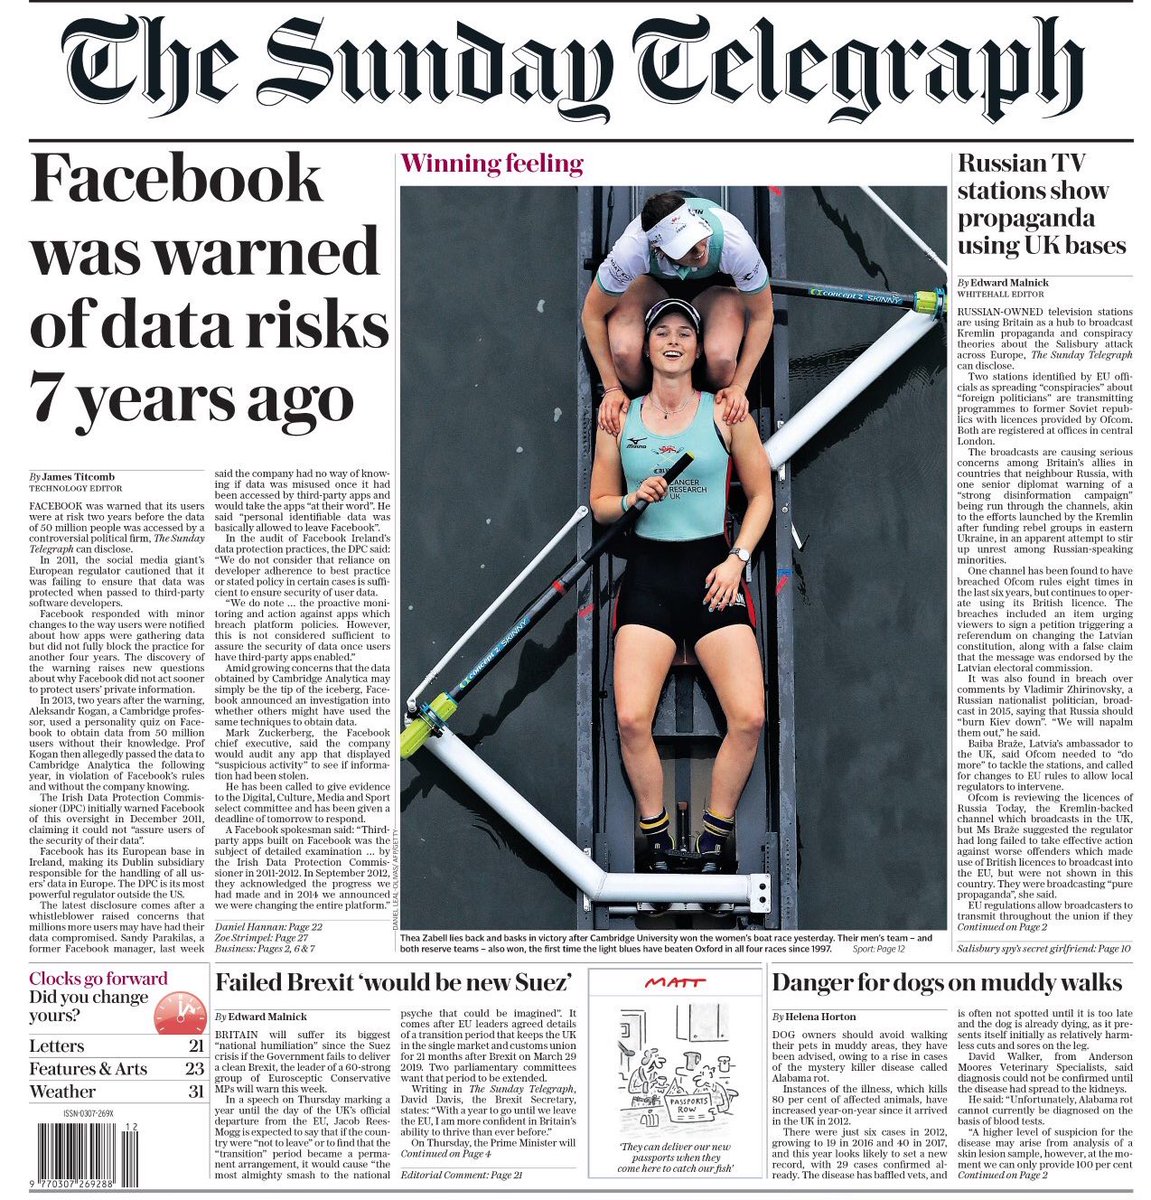 The Sunday Telegraph front page